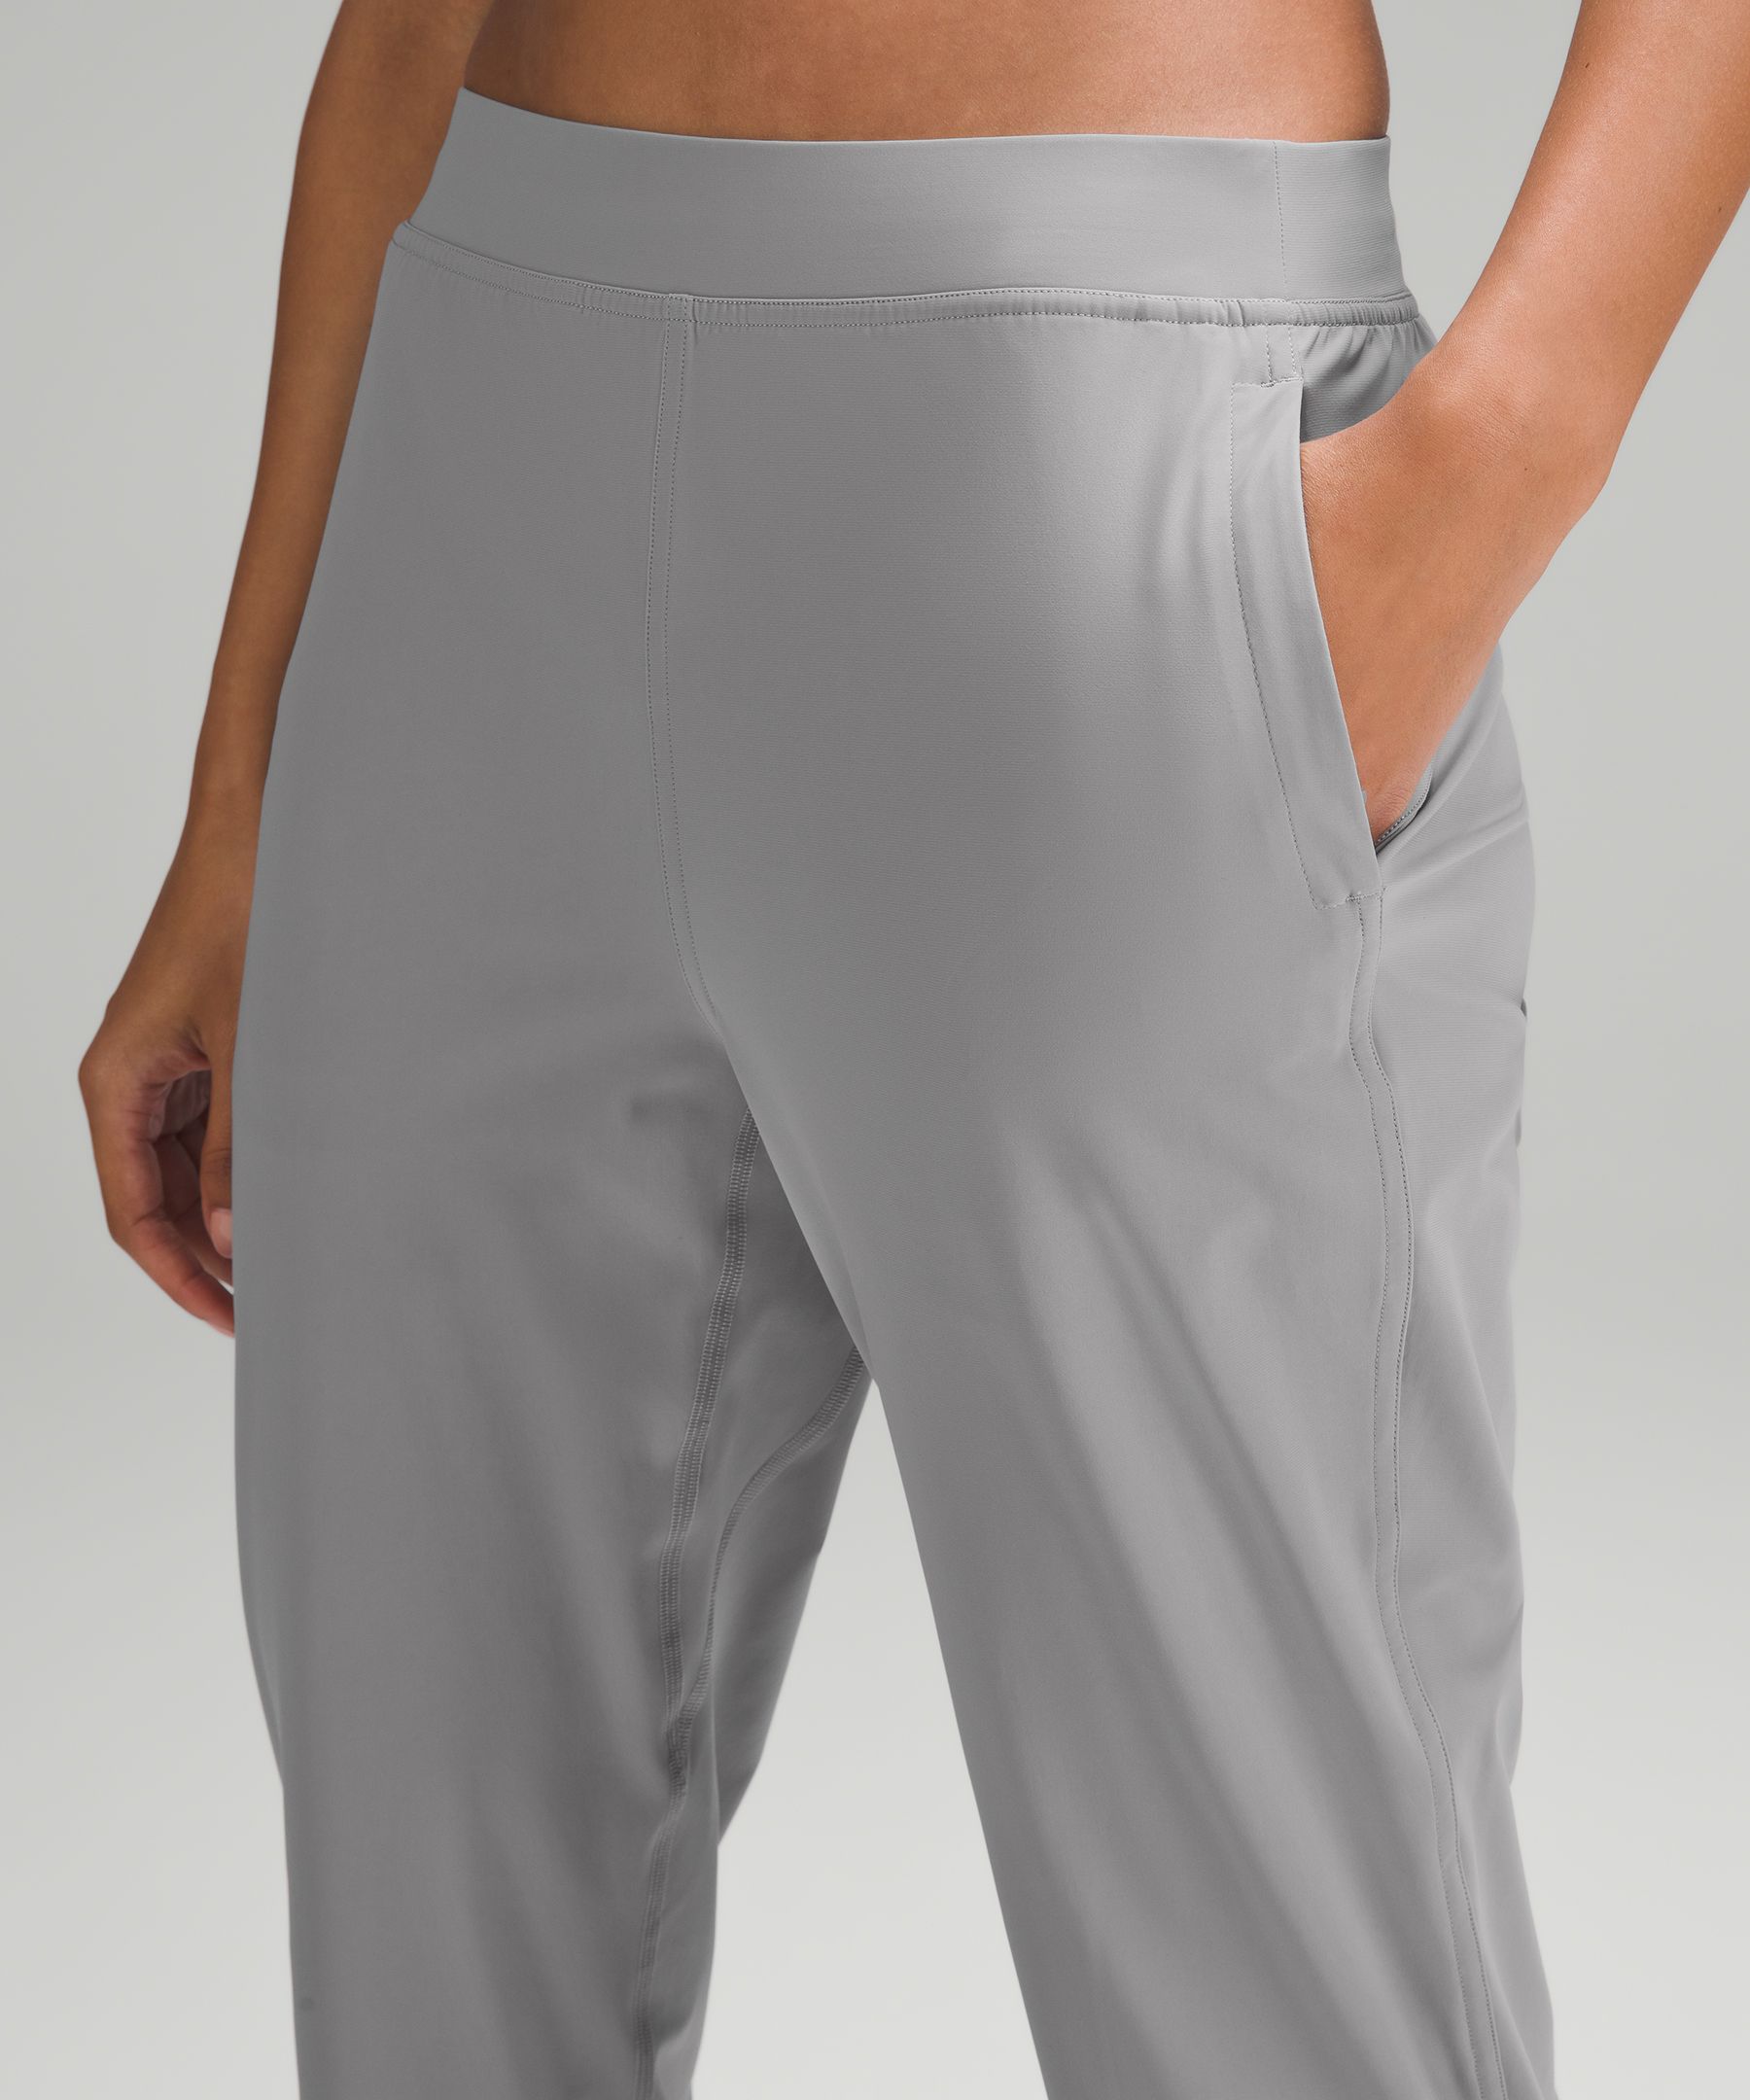 Lululemon Adapted State High-rise Cropped Joggers - Moonlit